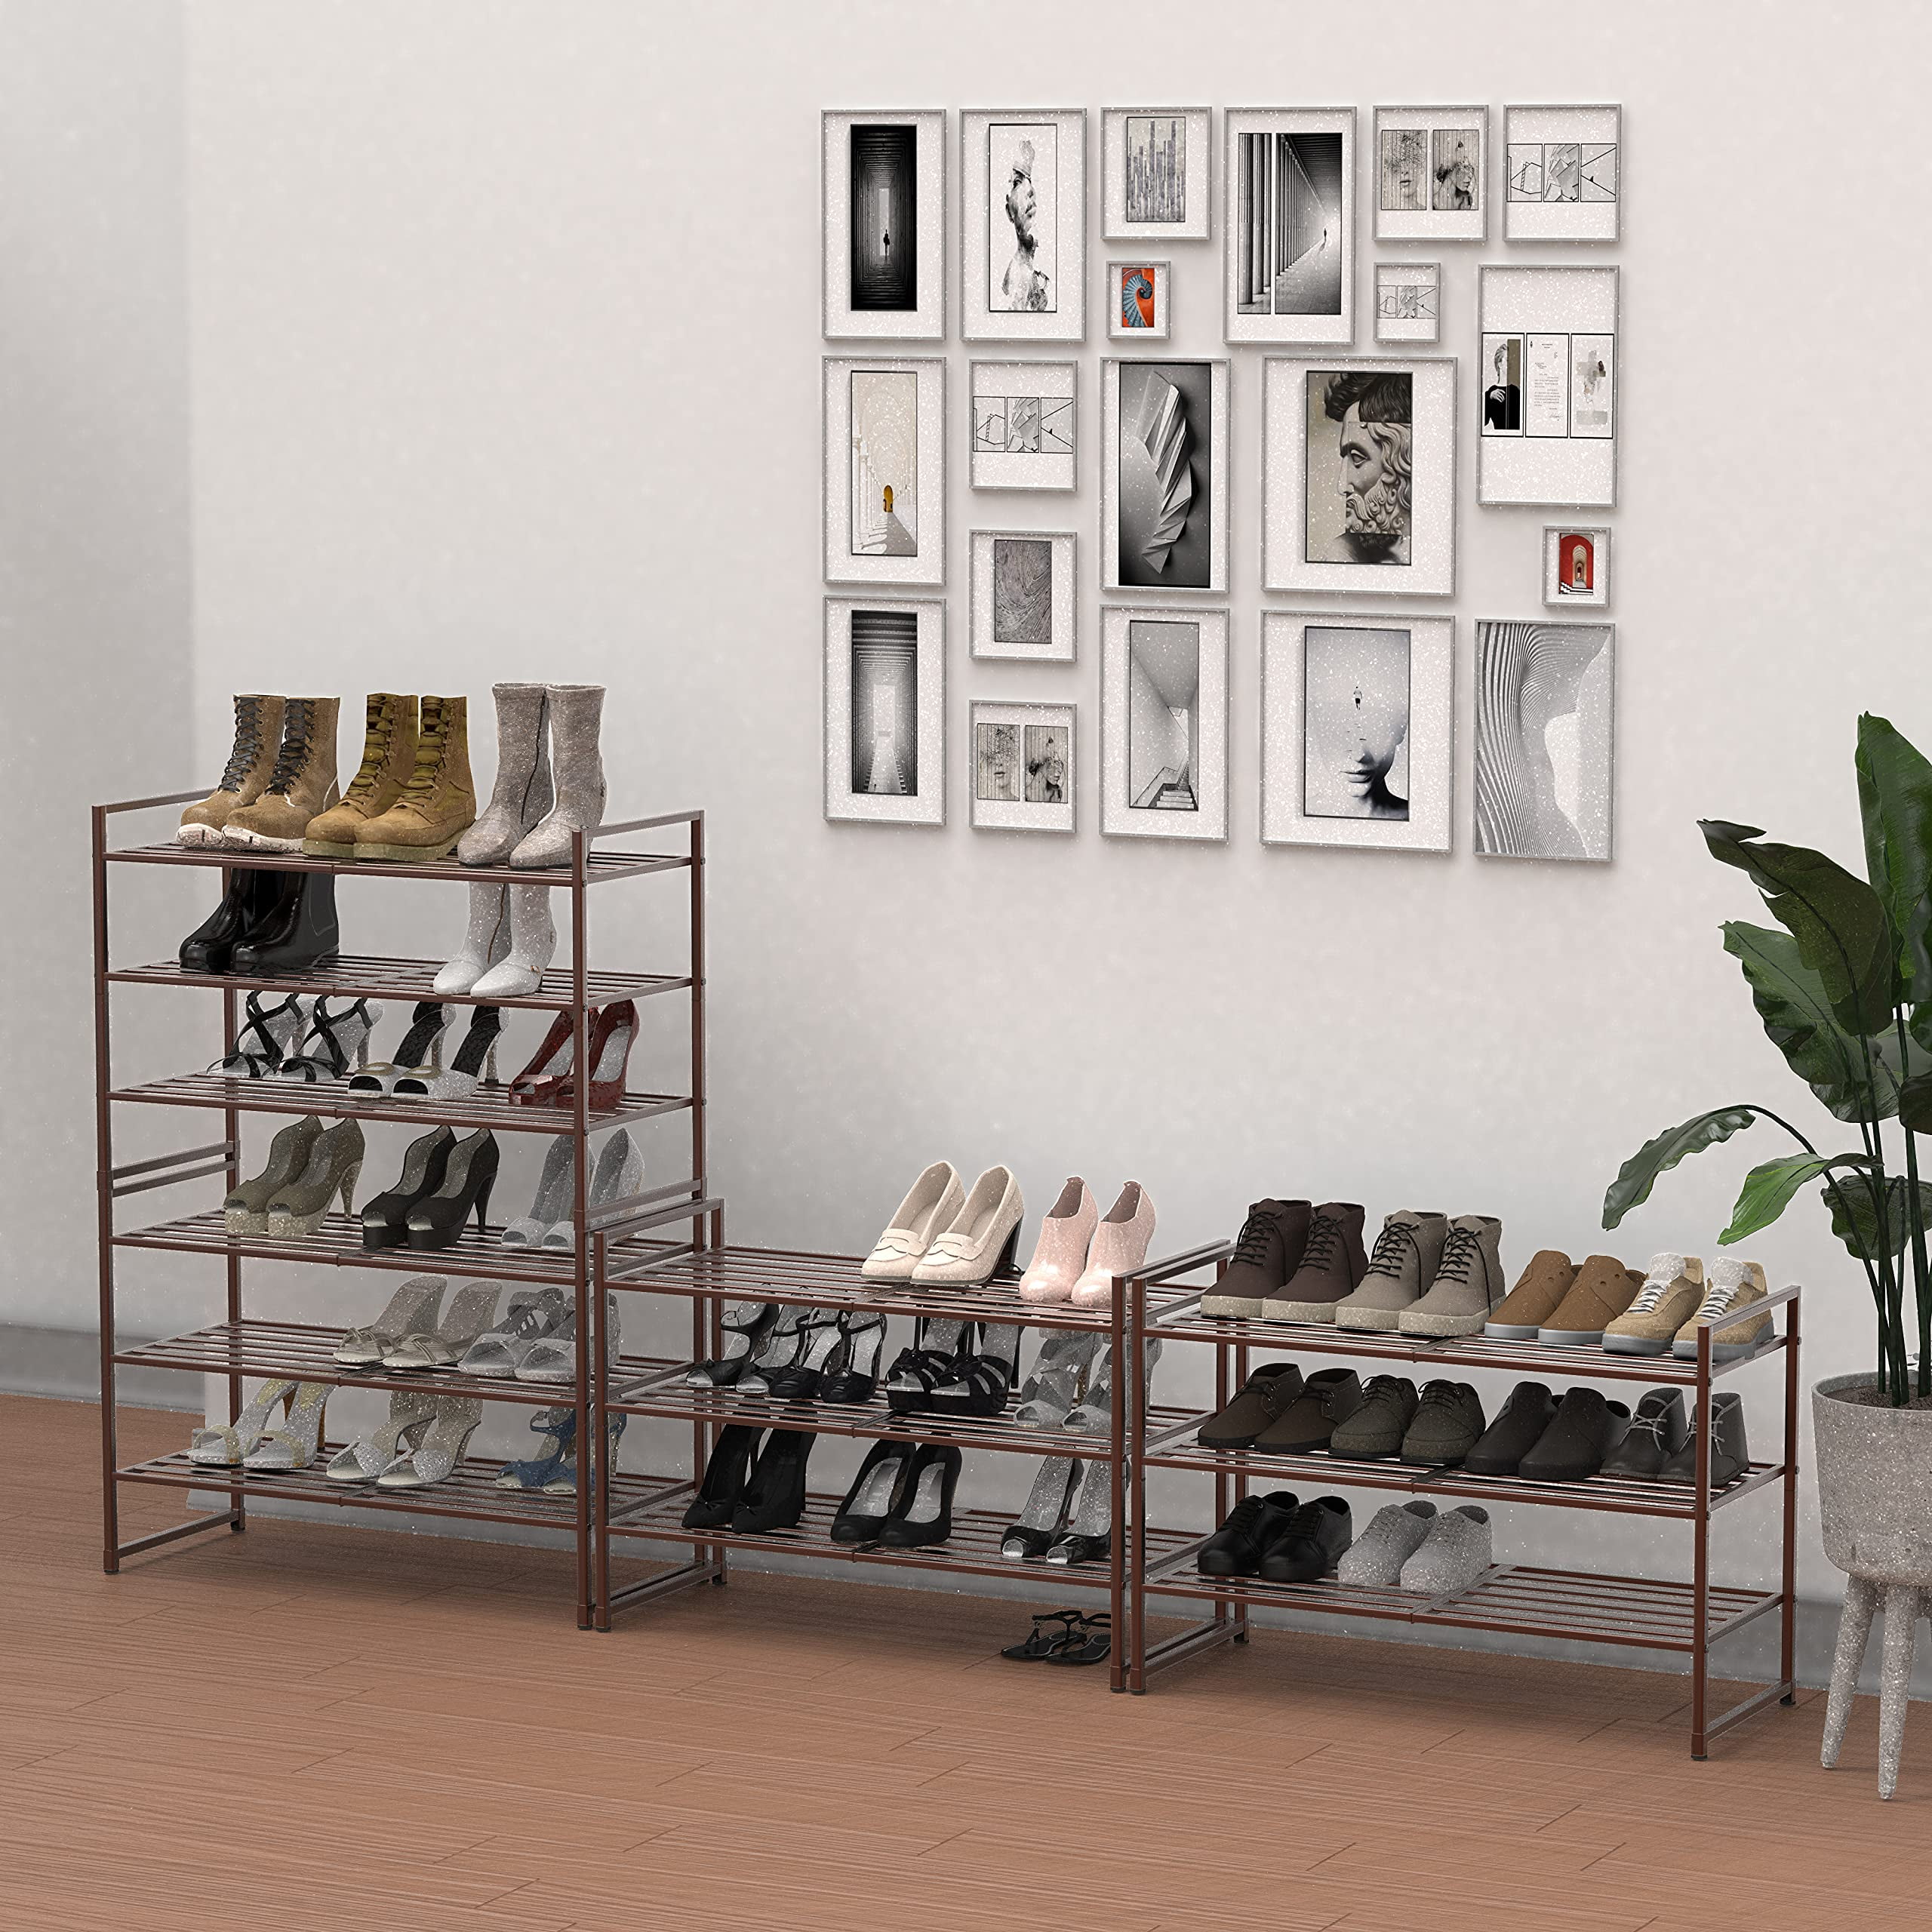 Simple Houseware 3-Tier Shoe Rack Storage Organizer Review: The Perfect Grey  Organizer for Your Shoe 